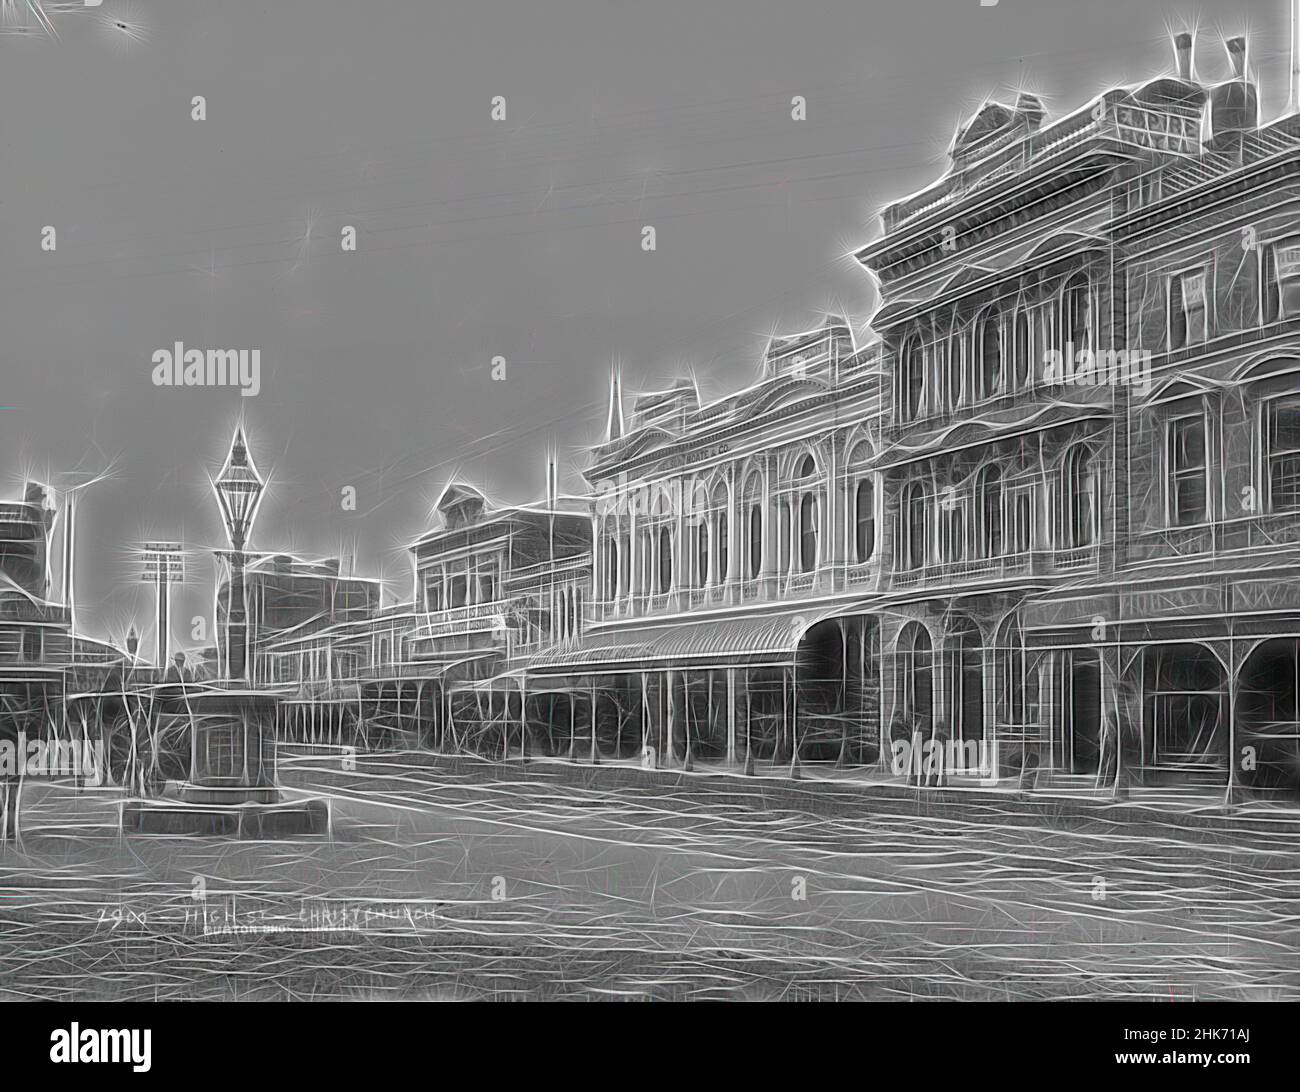 Inspired by High Street, Christchurch, Burton Brothers studio, photography studio, 1880s, Christchurch, gelatin dry plate process, A street scene showing a row of buildings at right, including the Empire Hotel. In the Universal Nelson Moate & Co building a first floor window sign reads [H. Chatteris, Reimagined by Artotop. Classic art reinvented with a modern twist. Design of warm cheerful glowing of brightness and light ray radiance. Photography inspired by surrealism and futurism, embracing dynamic energy of modern technology, movement, speed and revolutionize culture Stock Photo